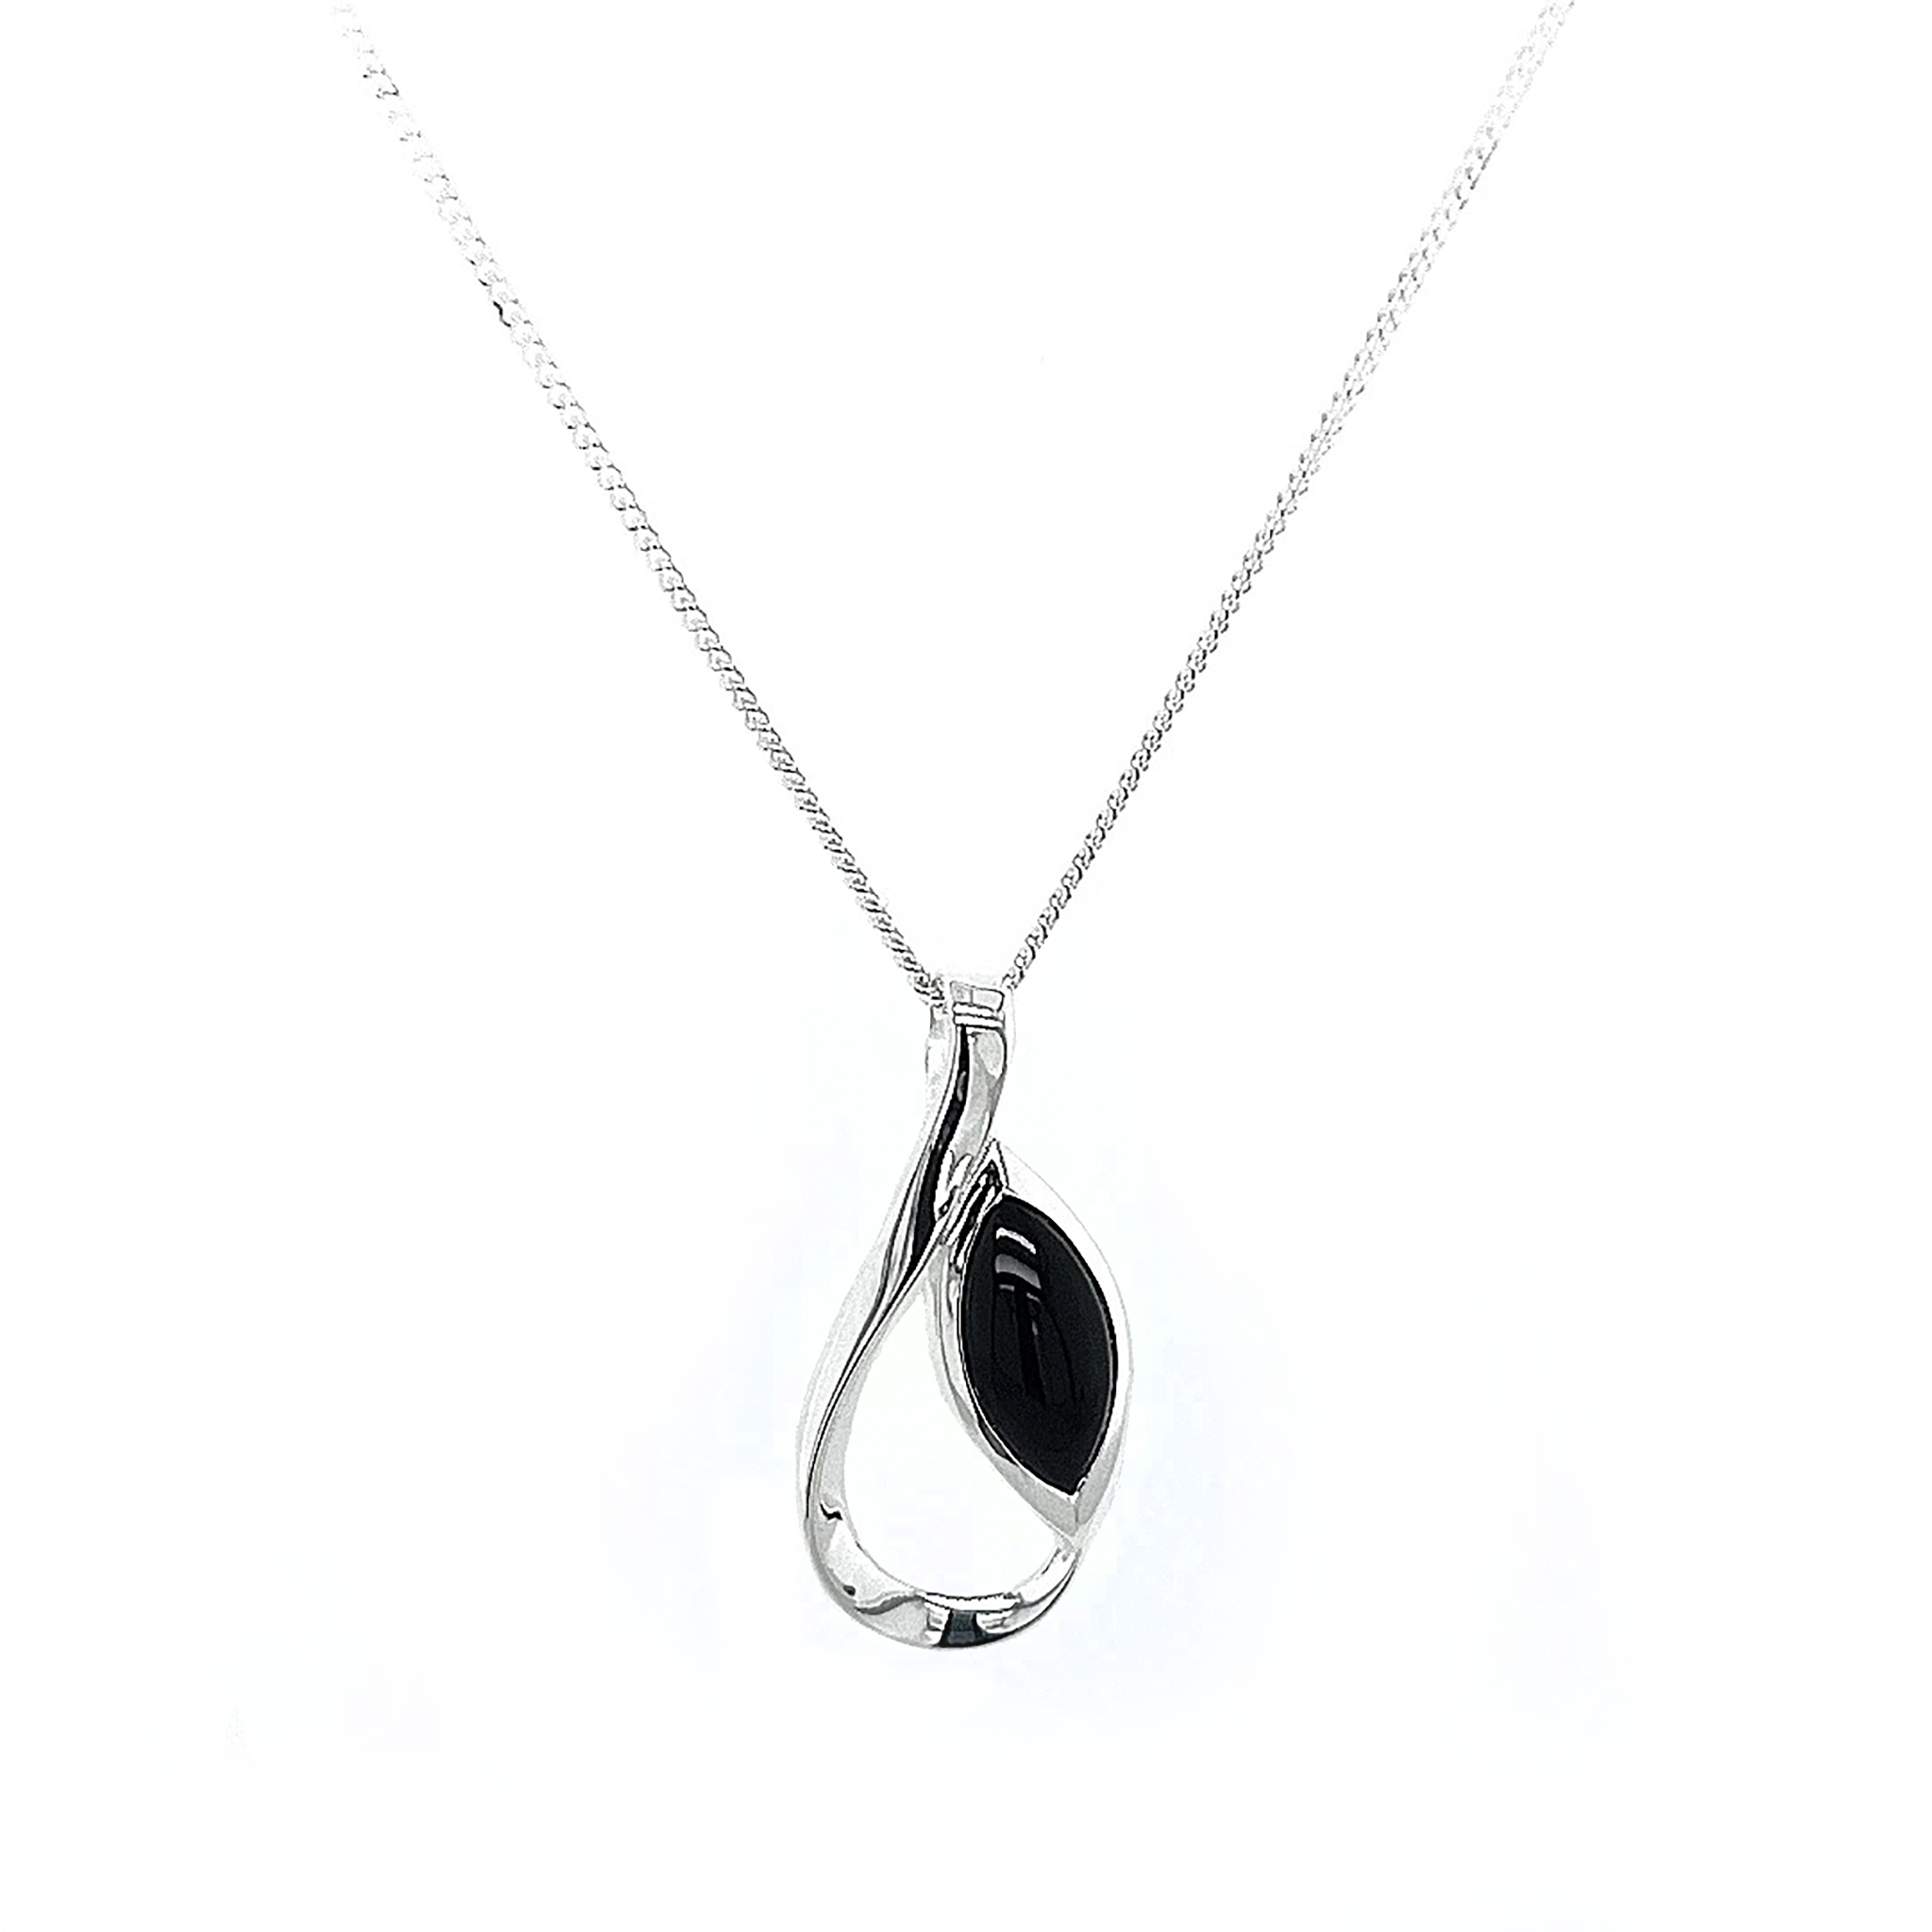 Silver and black onyx loop pendant on chain